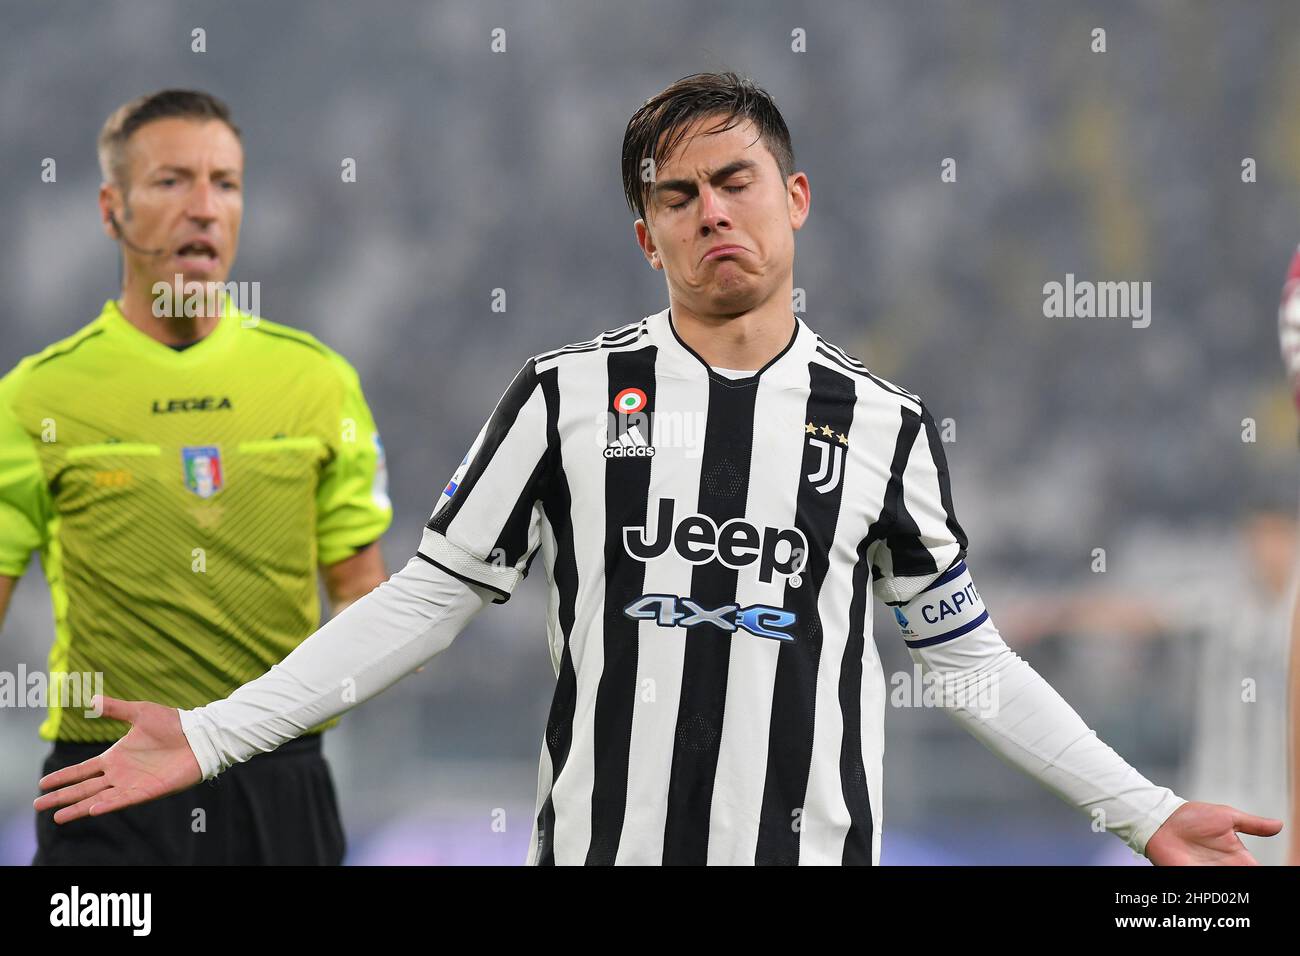 Paulo Dybala of Juventus FC reacts during the Serie A 2021/22 match between Juventus FC and Torino FC at Allianz Stadium on February 18, 2022 in Turin, Italy photo ReporterTorino (Photo by Reporter Torino/LiveMedia/Sipa USA) Stock Photo